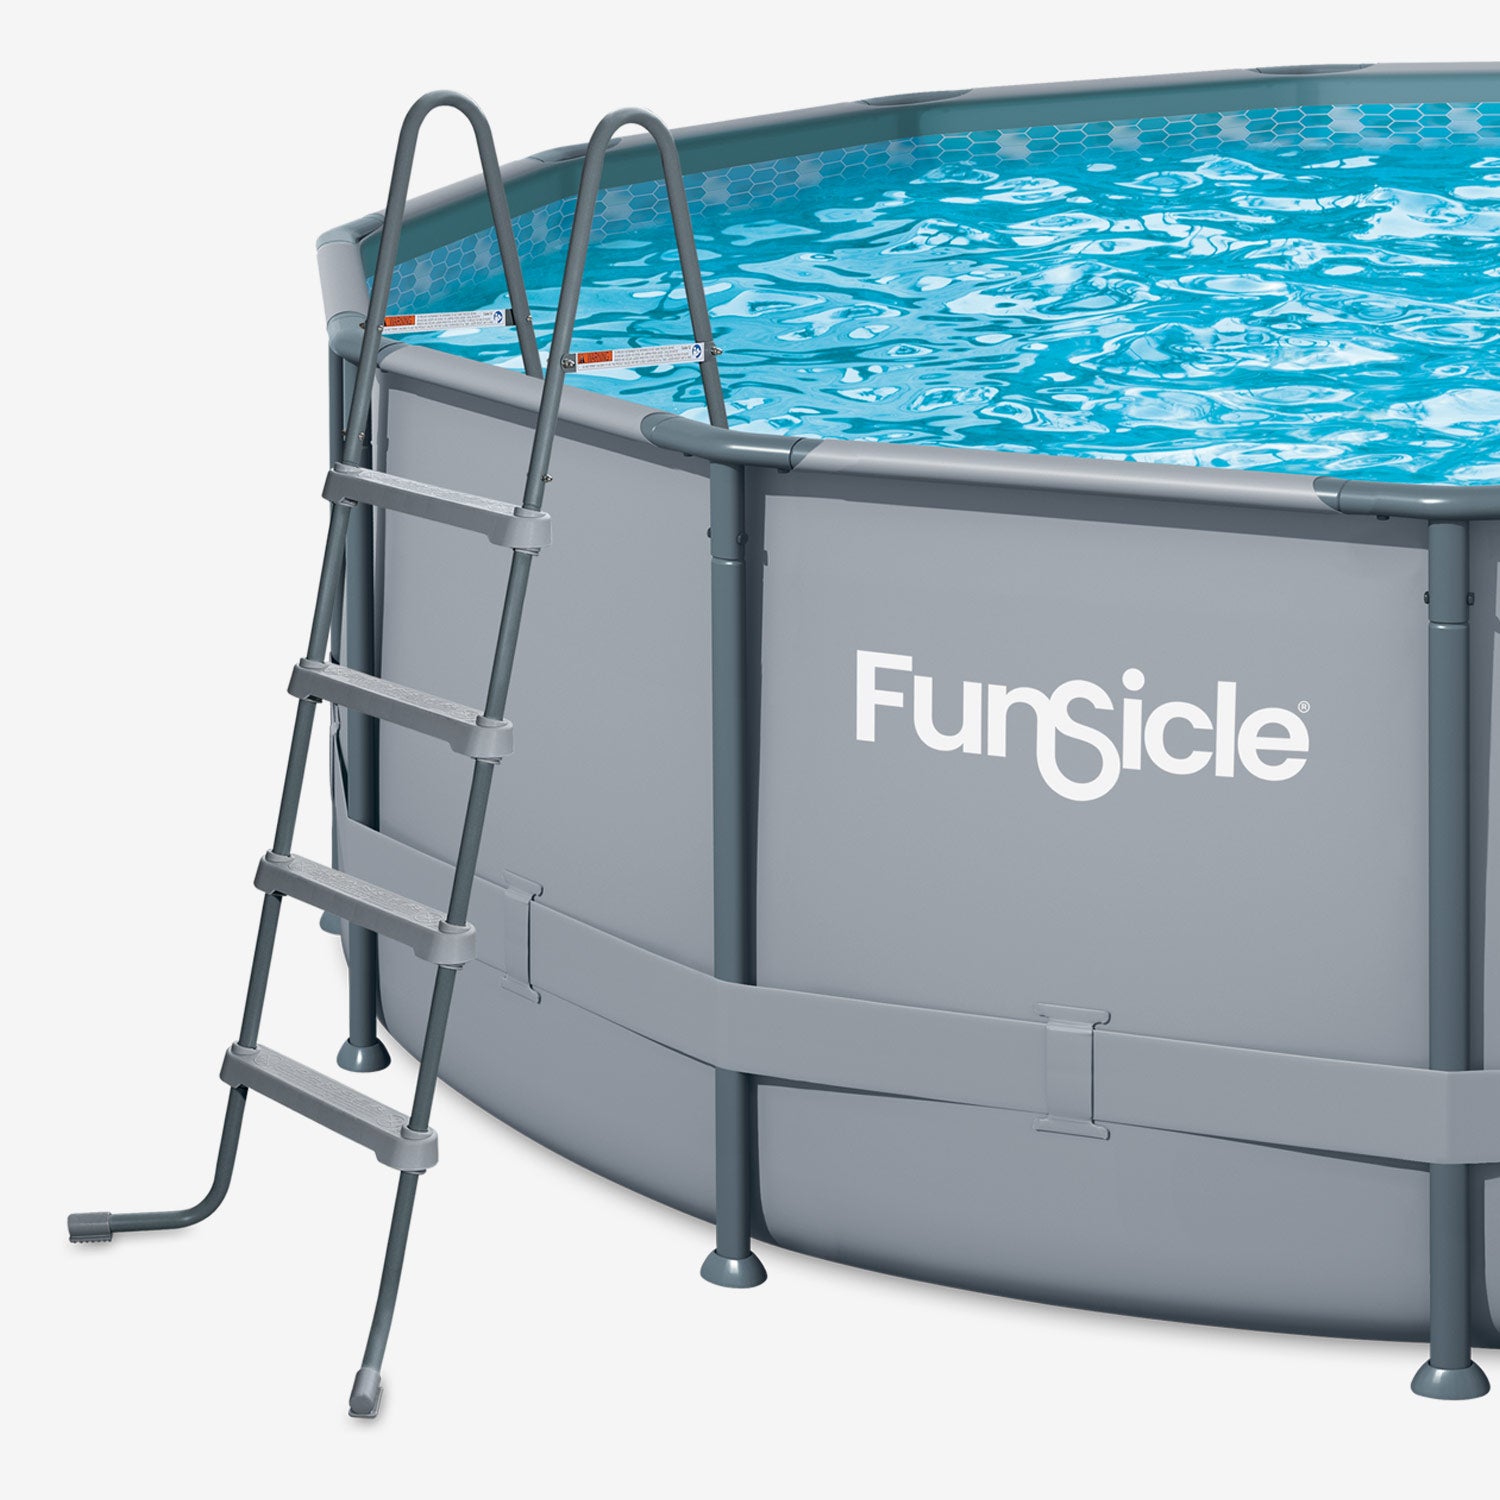 Funsicle 48" SureStep Ladder with a gray pool